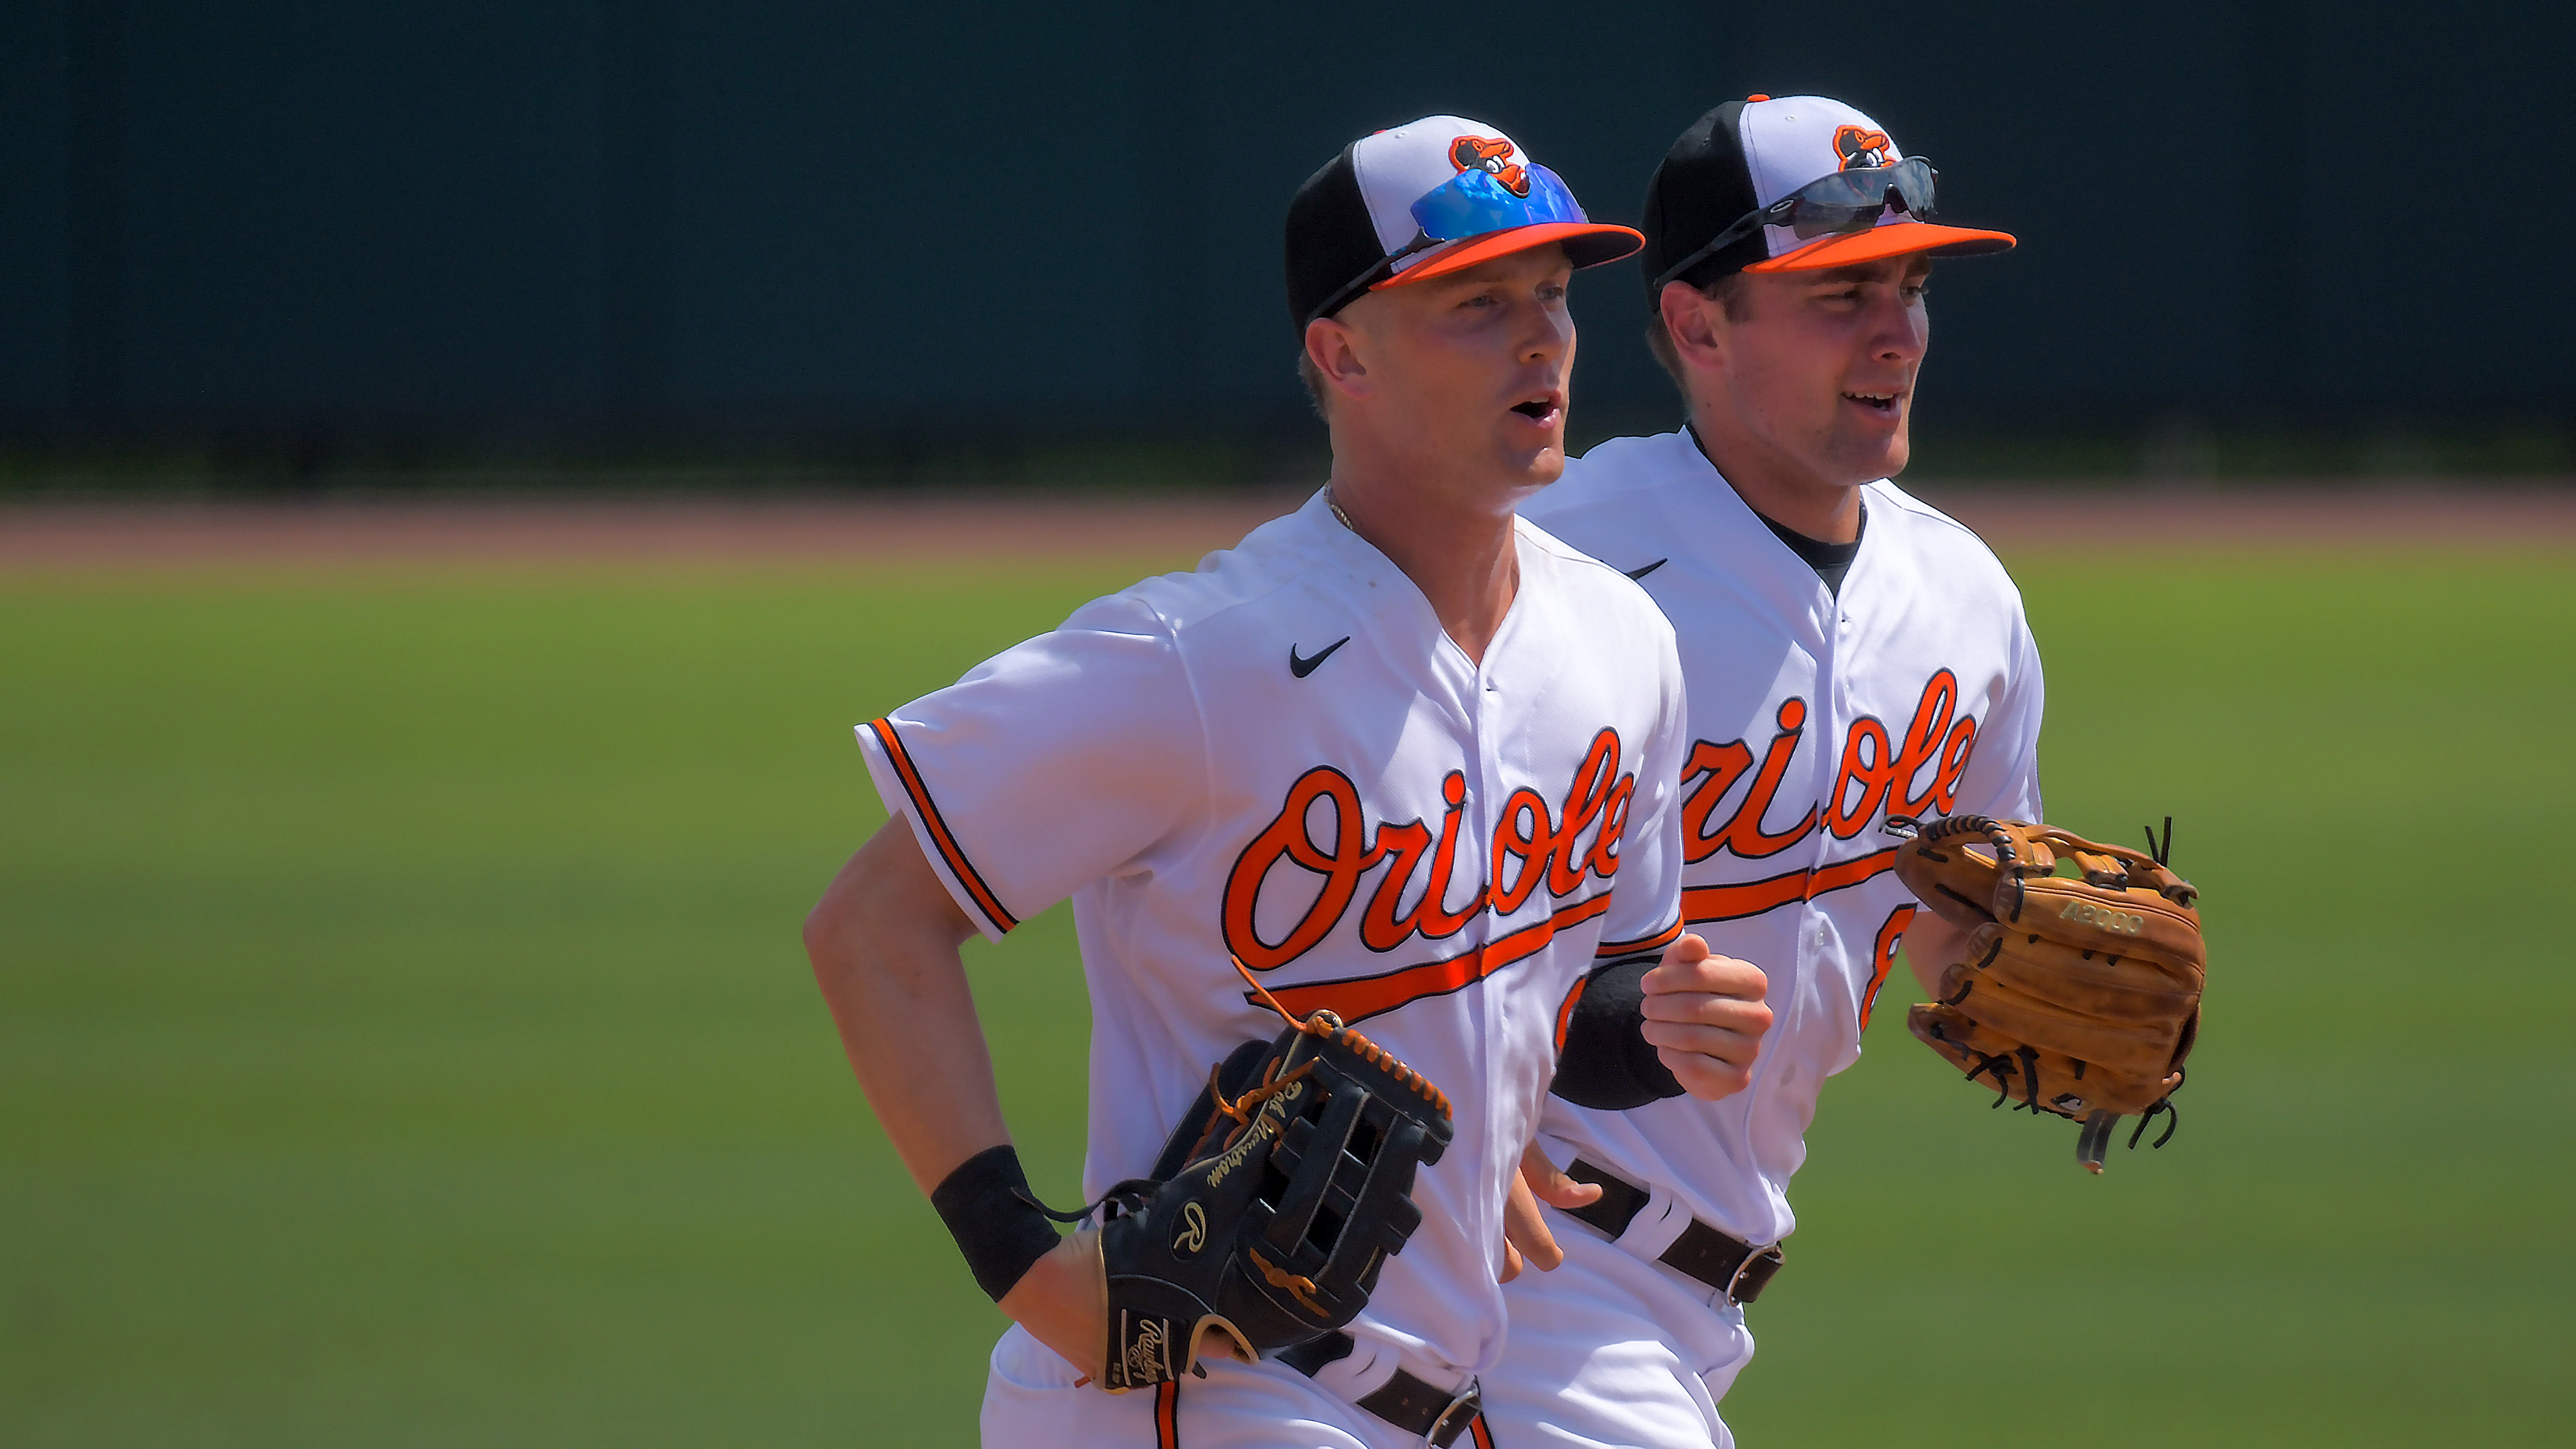 The next No. 1 MLB prospect? Jackson Holliday's first Orioles camp